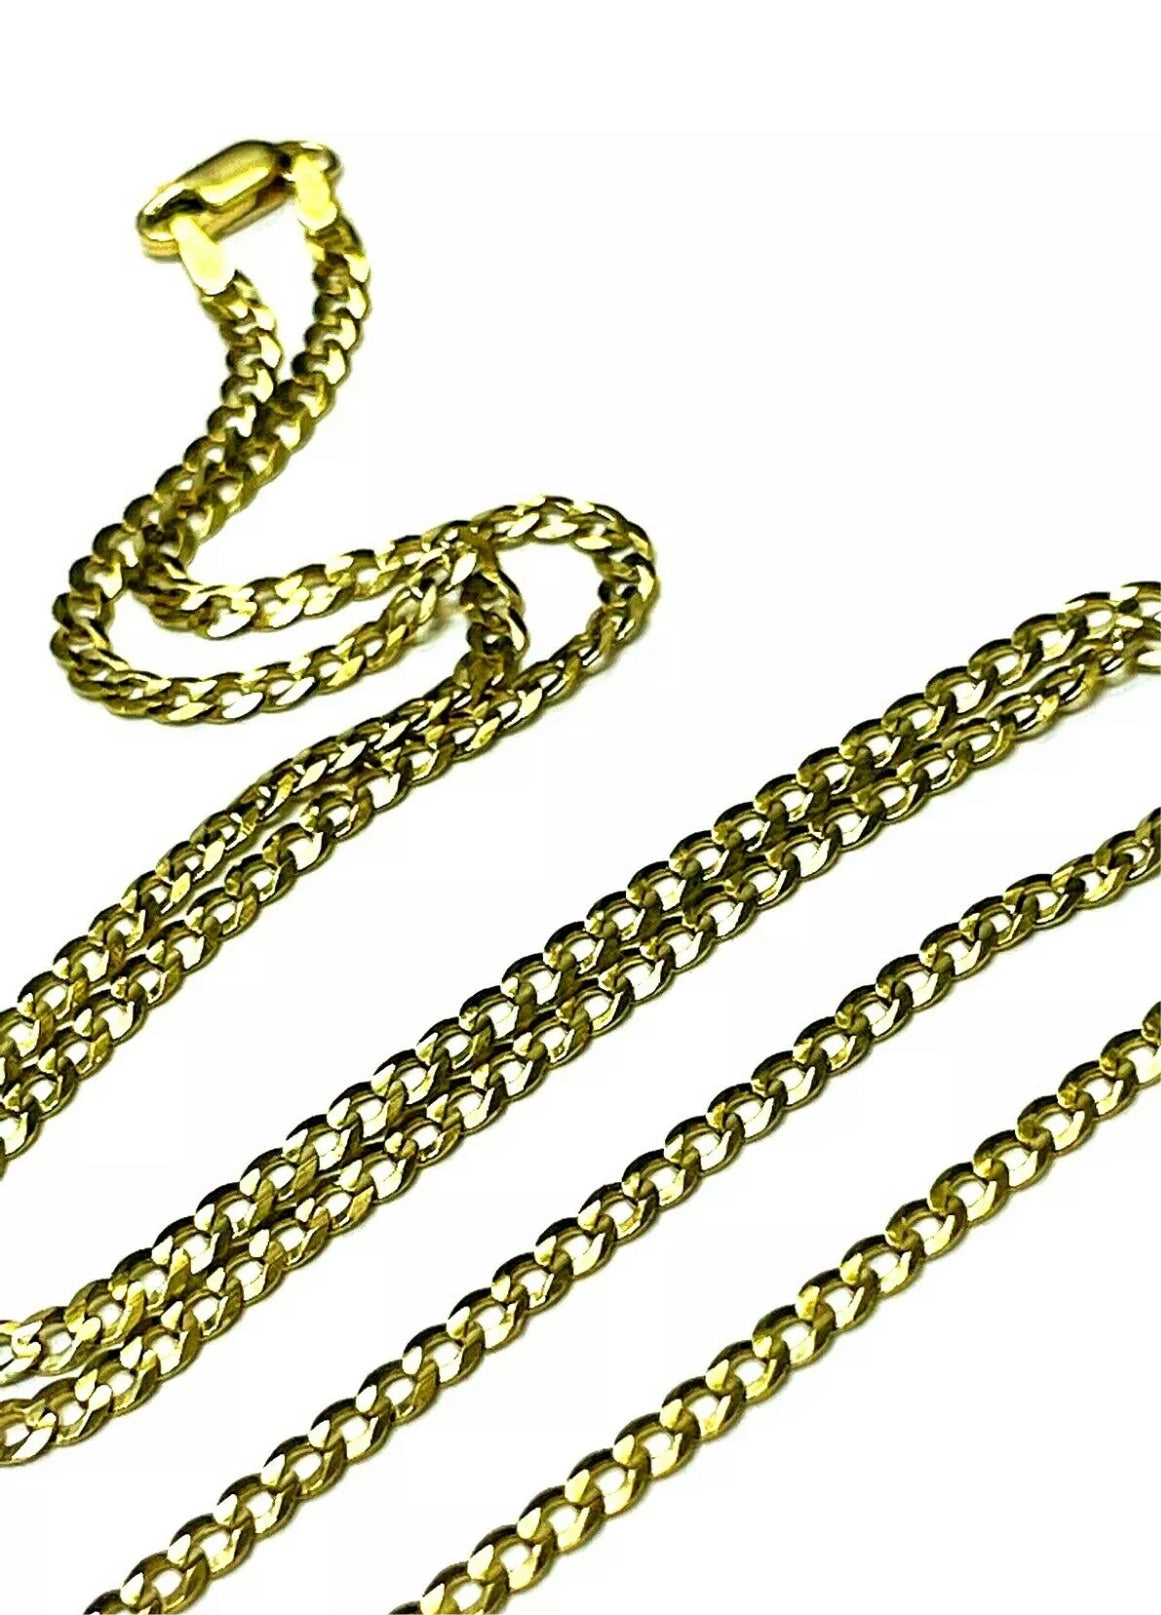 20" 3mm 14K Yellow Gold Curb Link Necklace